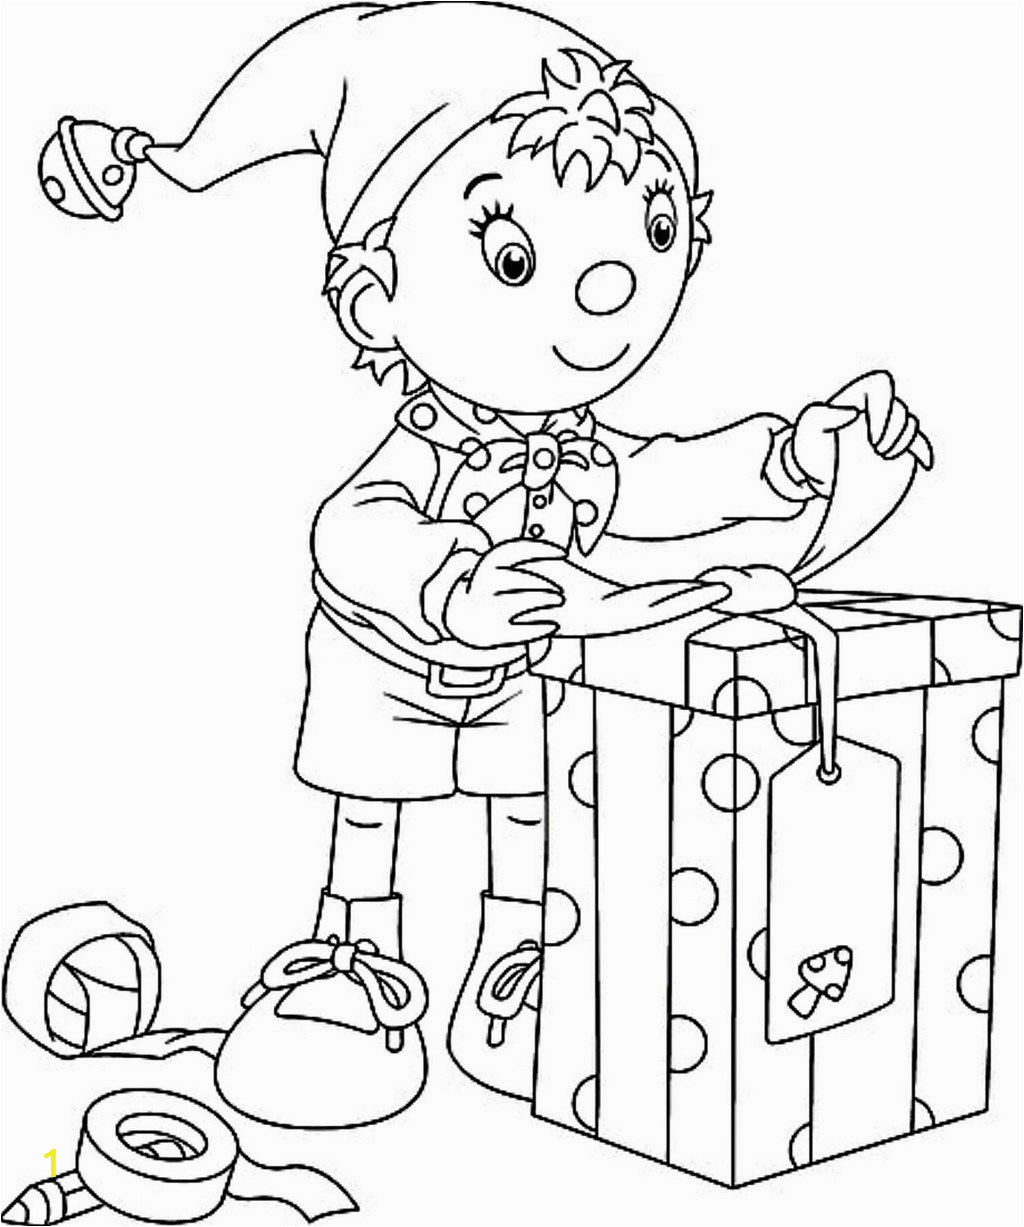 The Elf On the Shelf Coloring Pages Elf On the Shelf Coloring Pages for Your Little Angles with